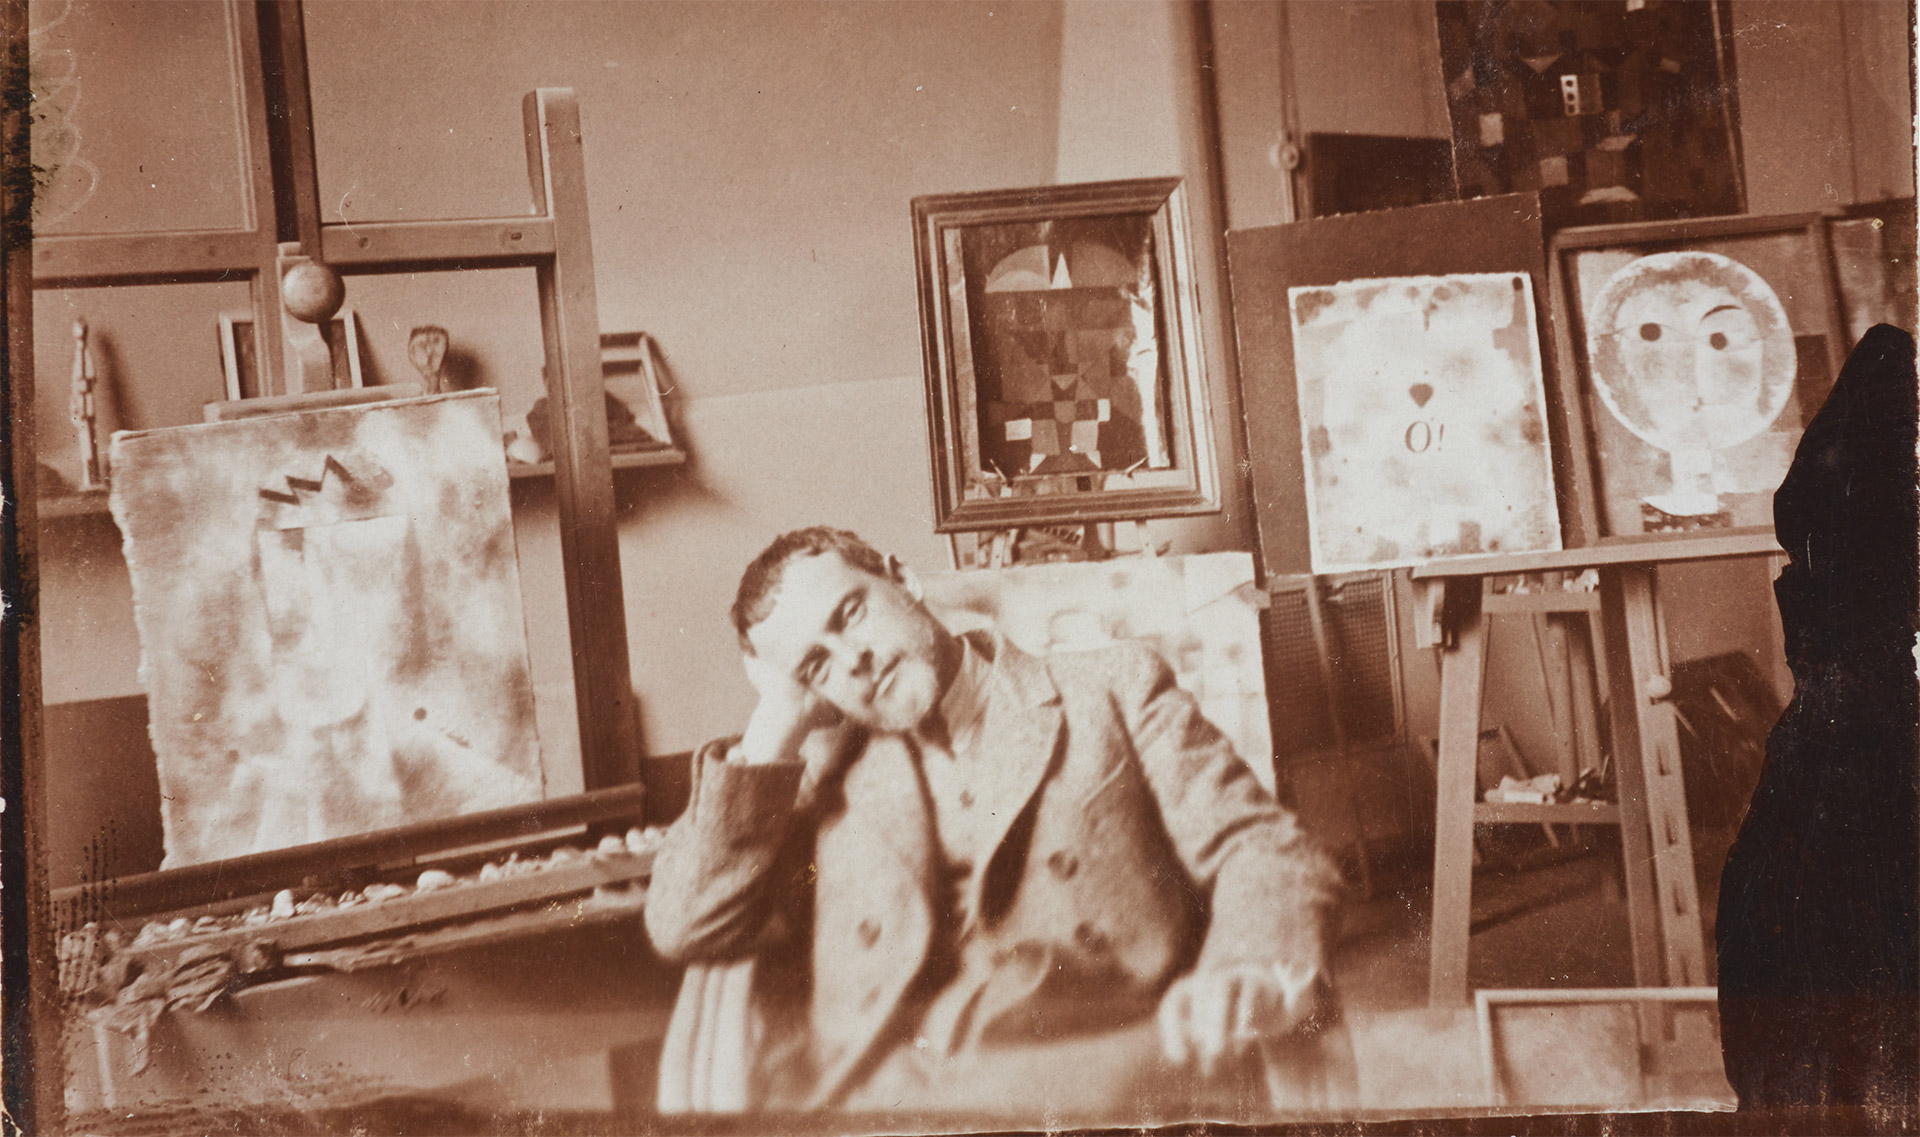 A photo of Paul Klee in his studio at the Bauhaus in Weimar, dated 1923.